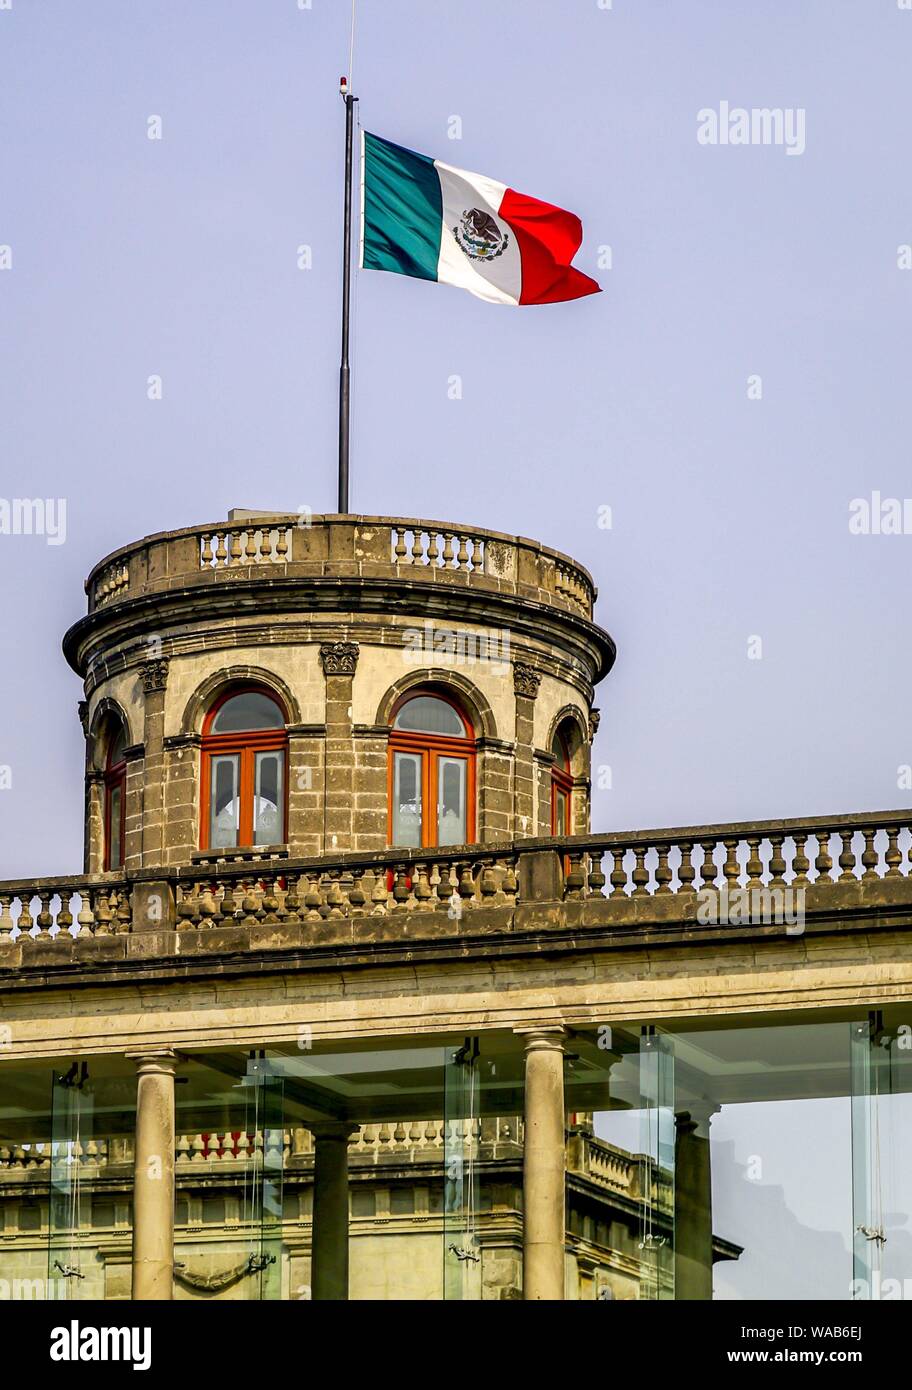 A gardener cuts a hedge in the garden of Chapultepec Castle in Mexico City using hand scissors and a spirit level. Castle and park are part of the popular excursion area Bosque de Chapultepec. (20 January 2015) | usage worldwide Stock Photo